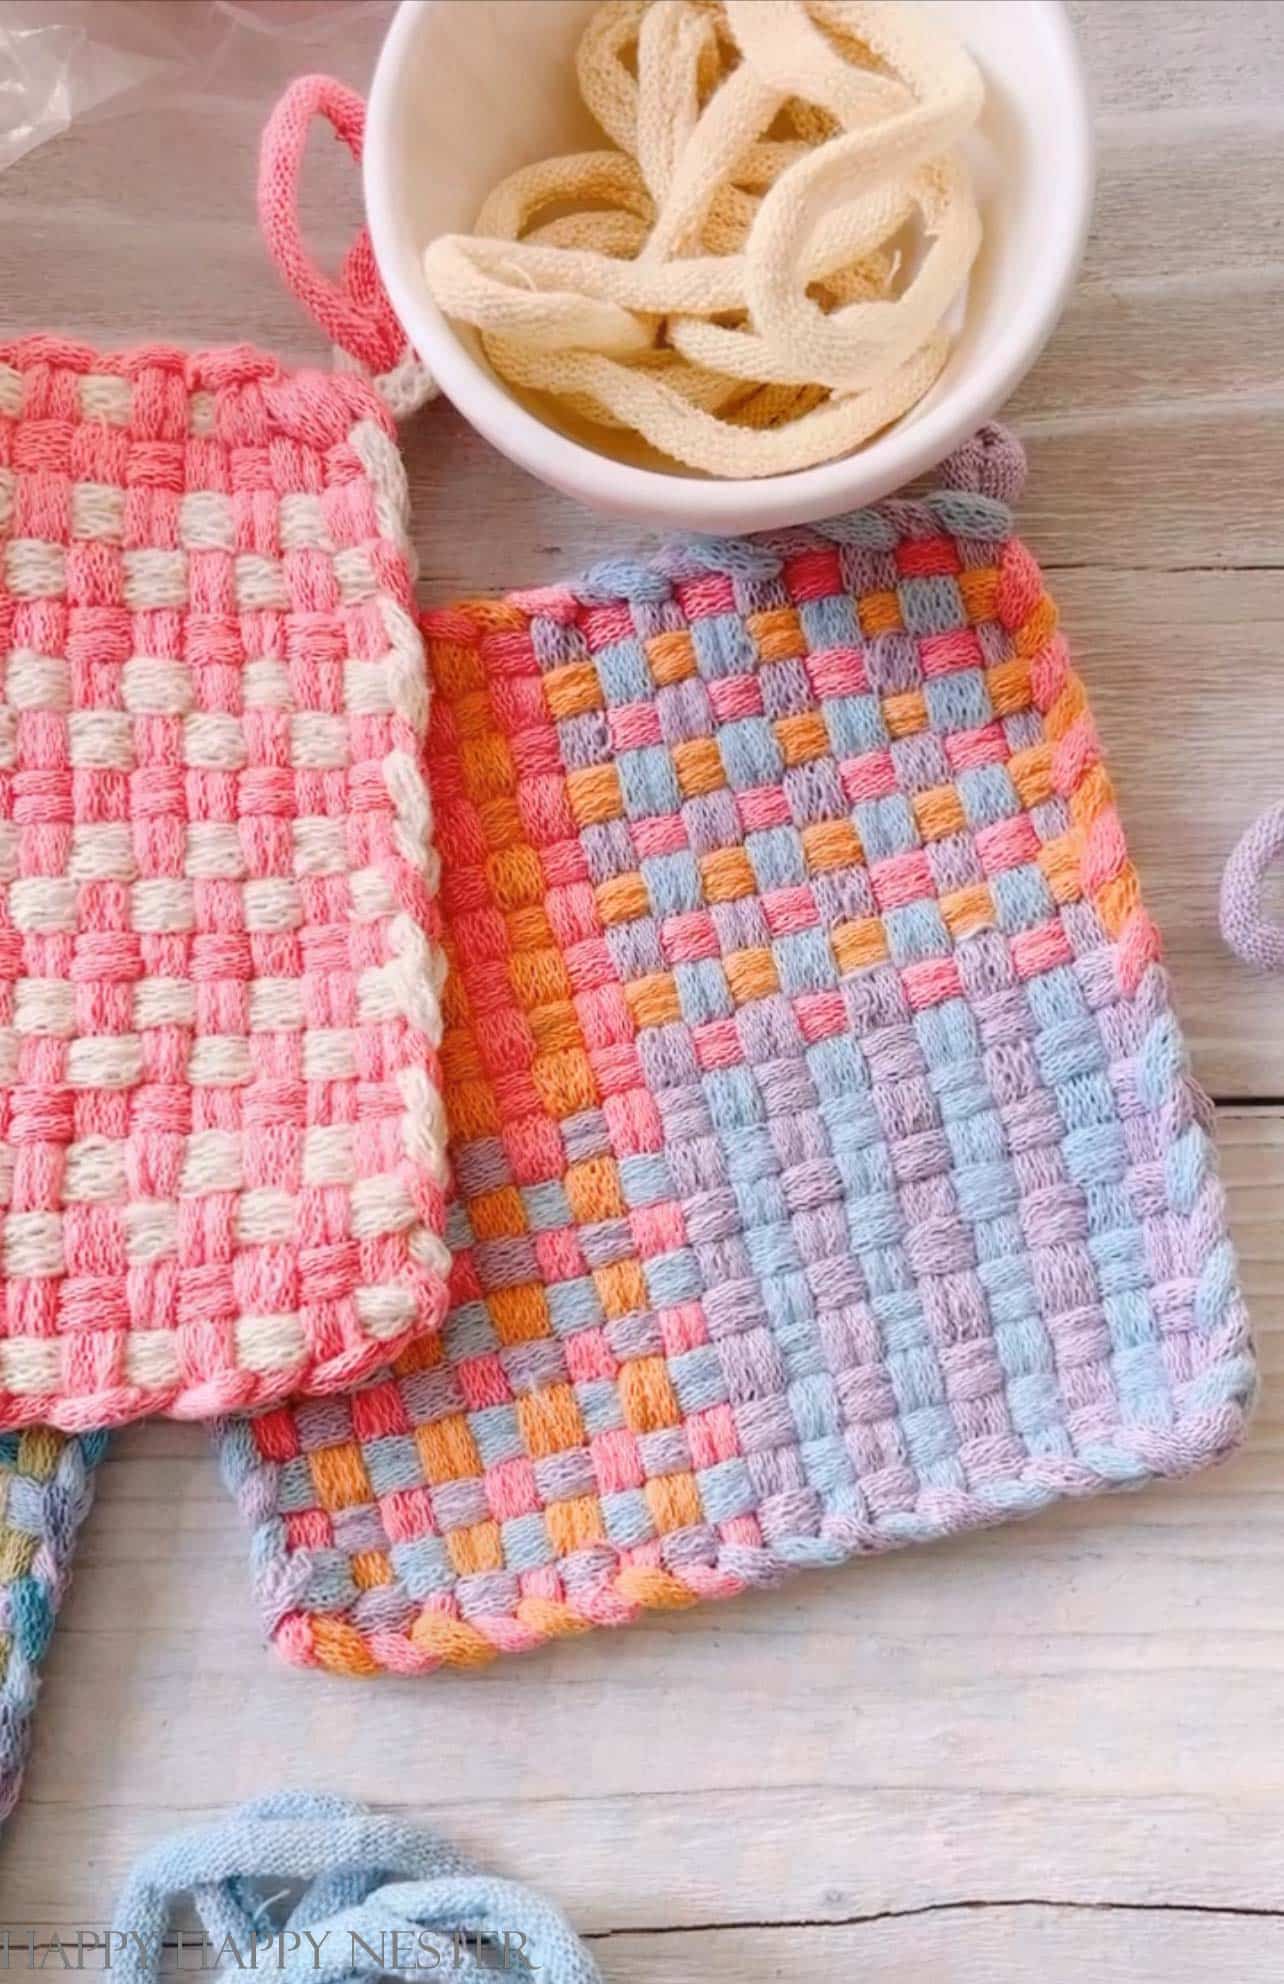 Loom Potholder Tutorial - v e r y p i n k . c o m - knitting patterns and  video tutorials